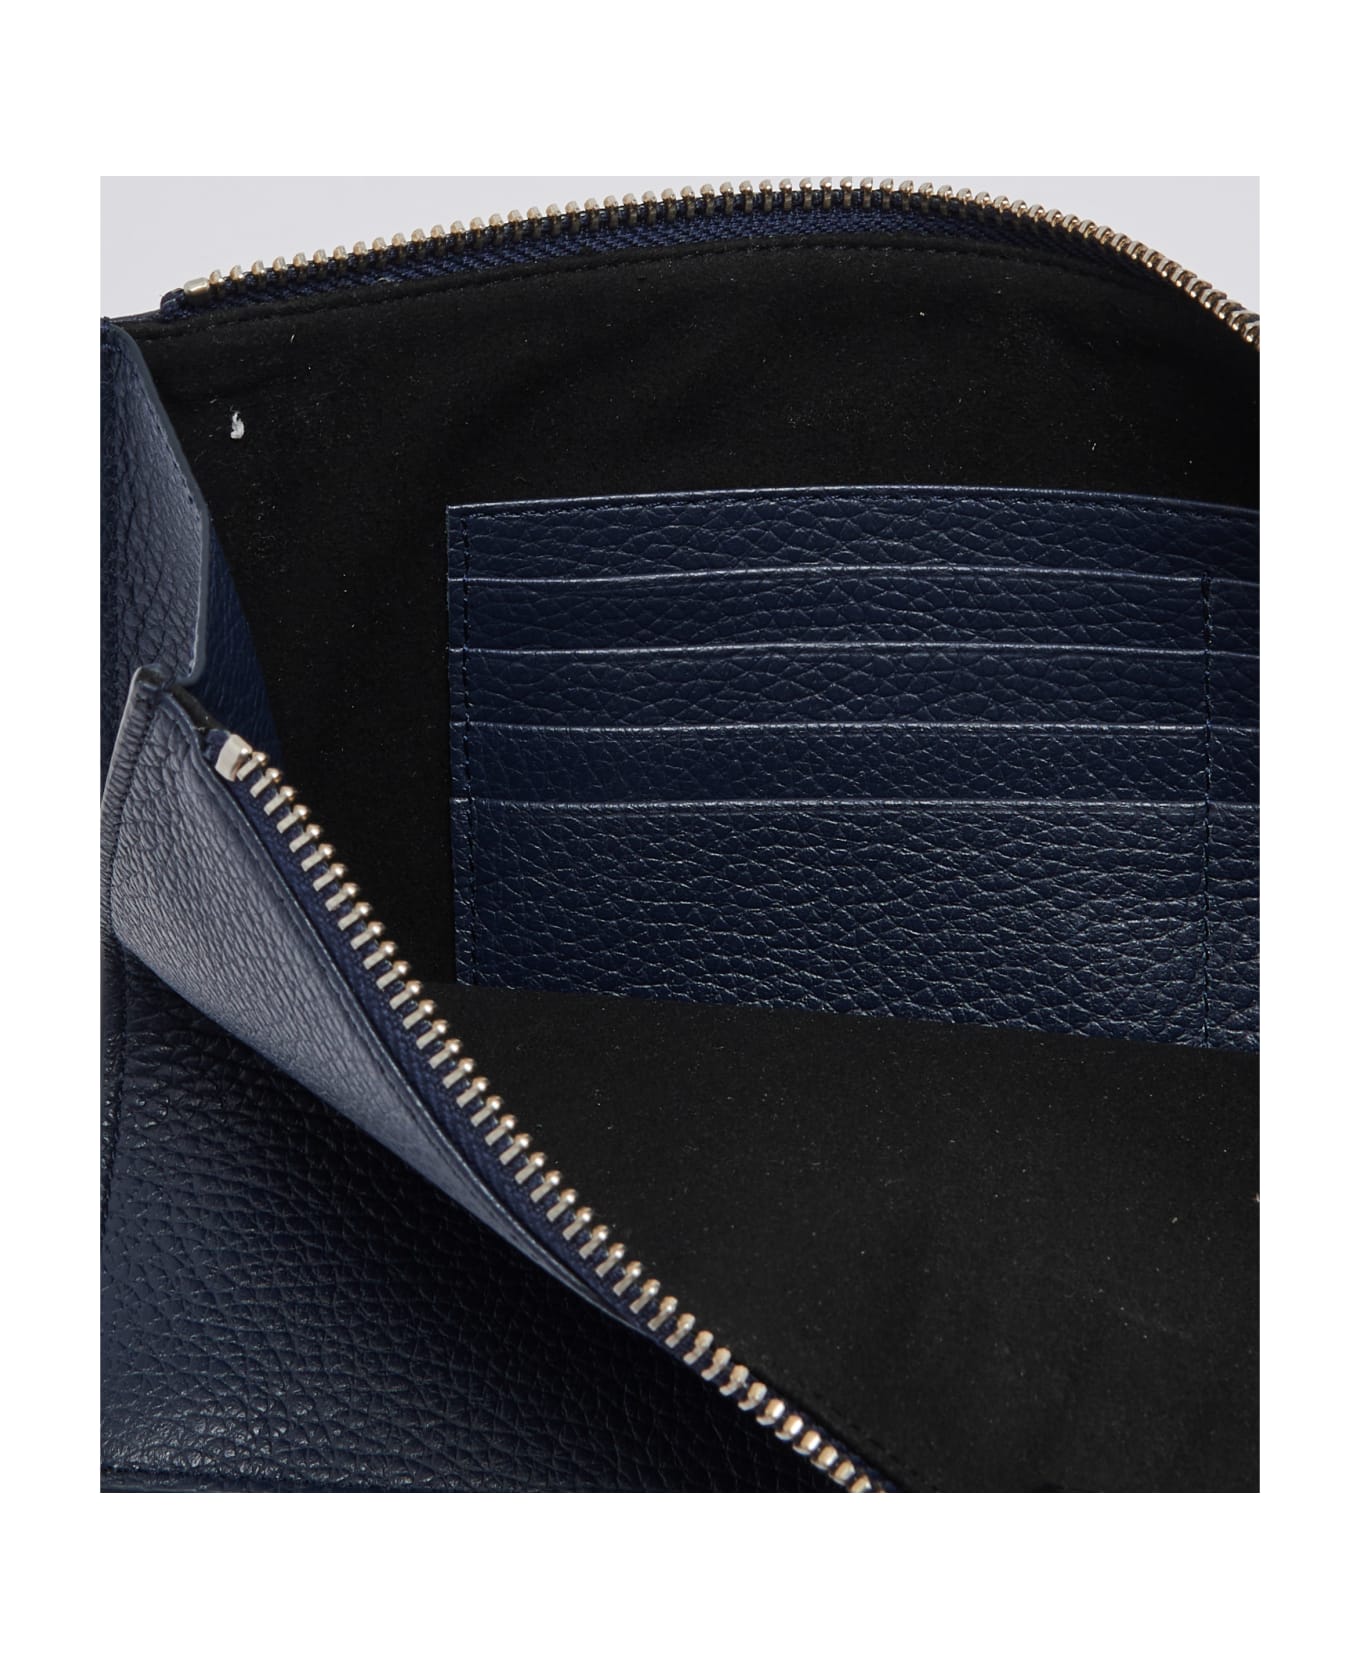 Orciani Pocket Grande Micron Clutch - NAVY バッグ